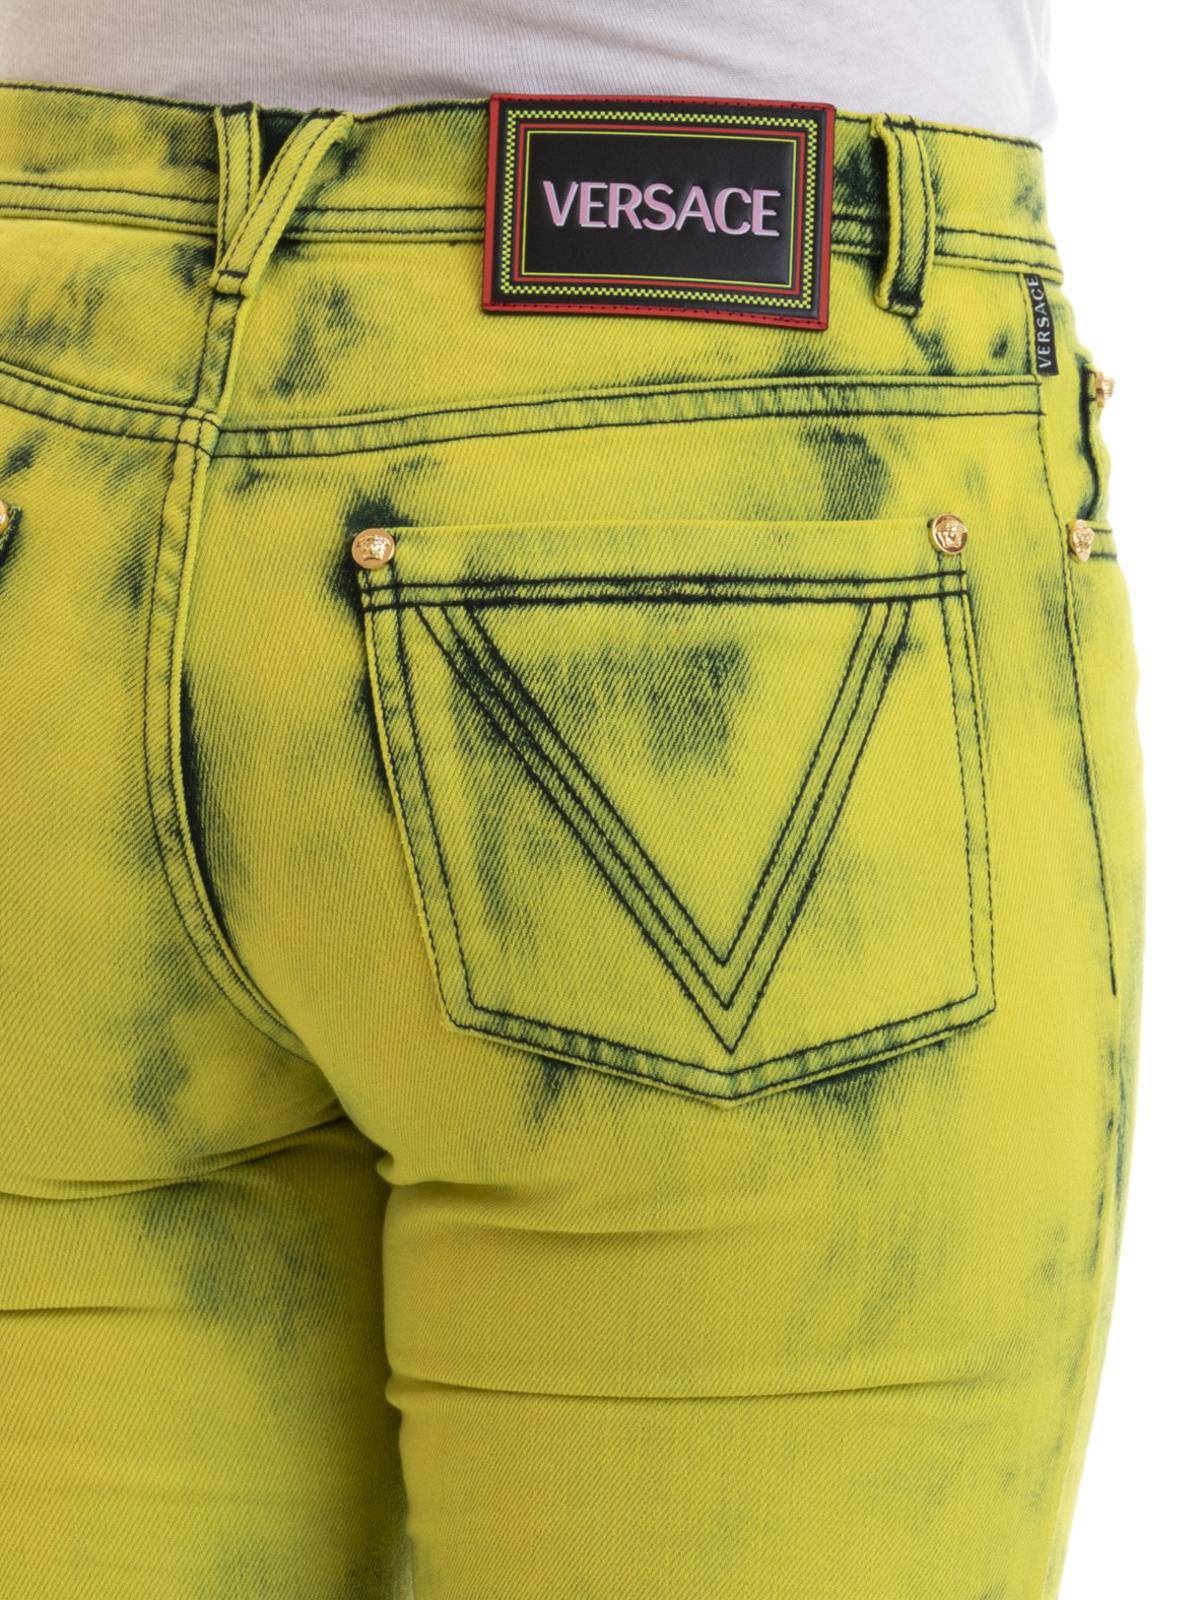 Versace Yellow Acid Wash Denim Skinny Jeans with Logo Label Size 27 For Sale 1